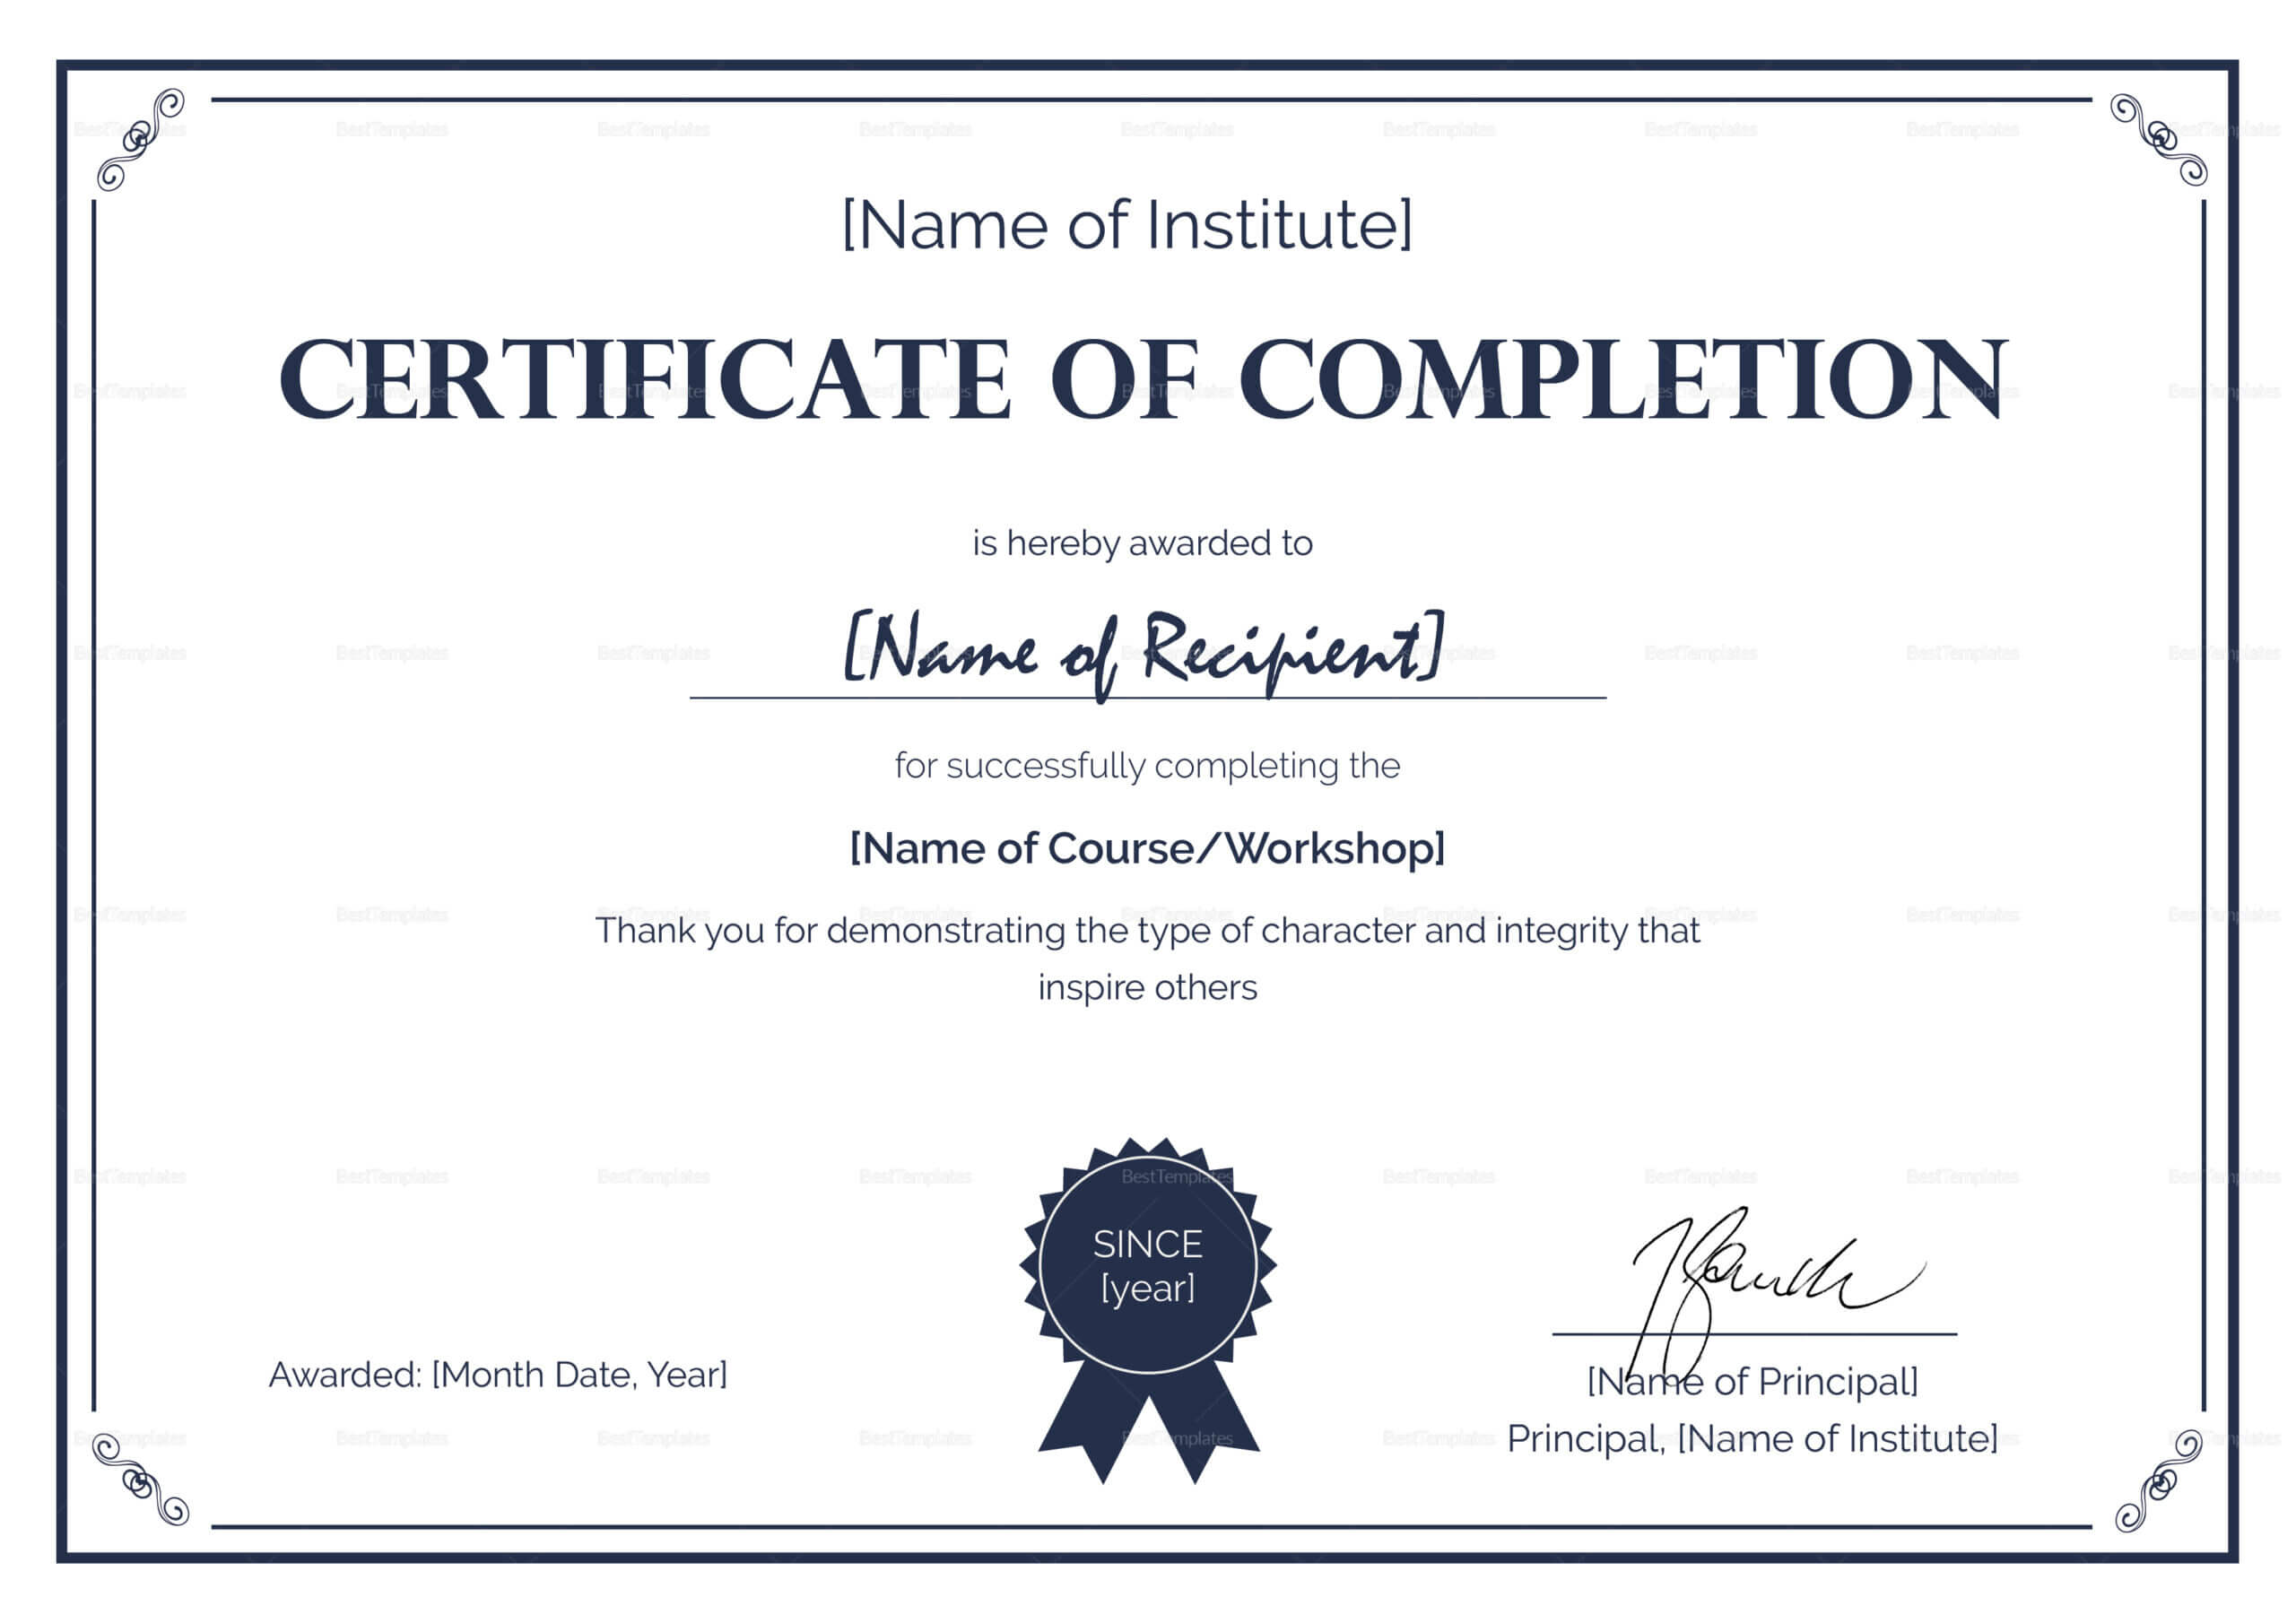 007 Certificate Of Completion Template Ideas Fantastic Inside Certification Of Completion Template